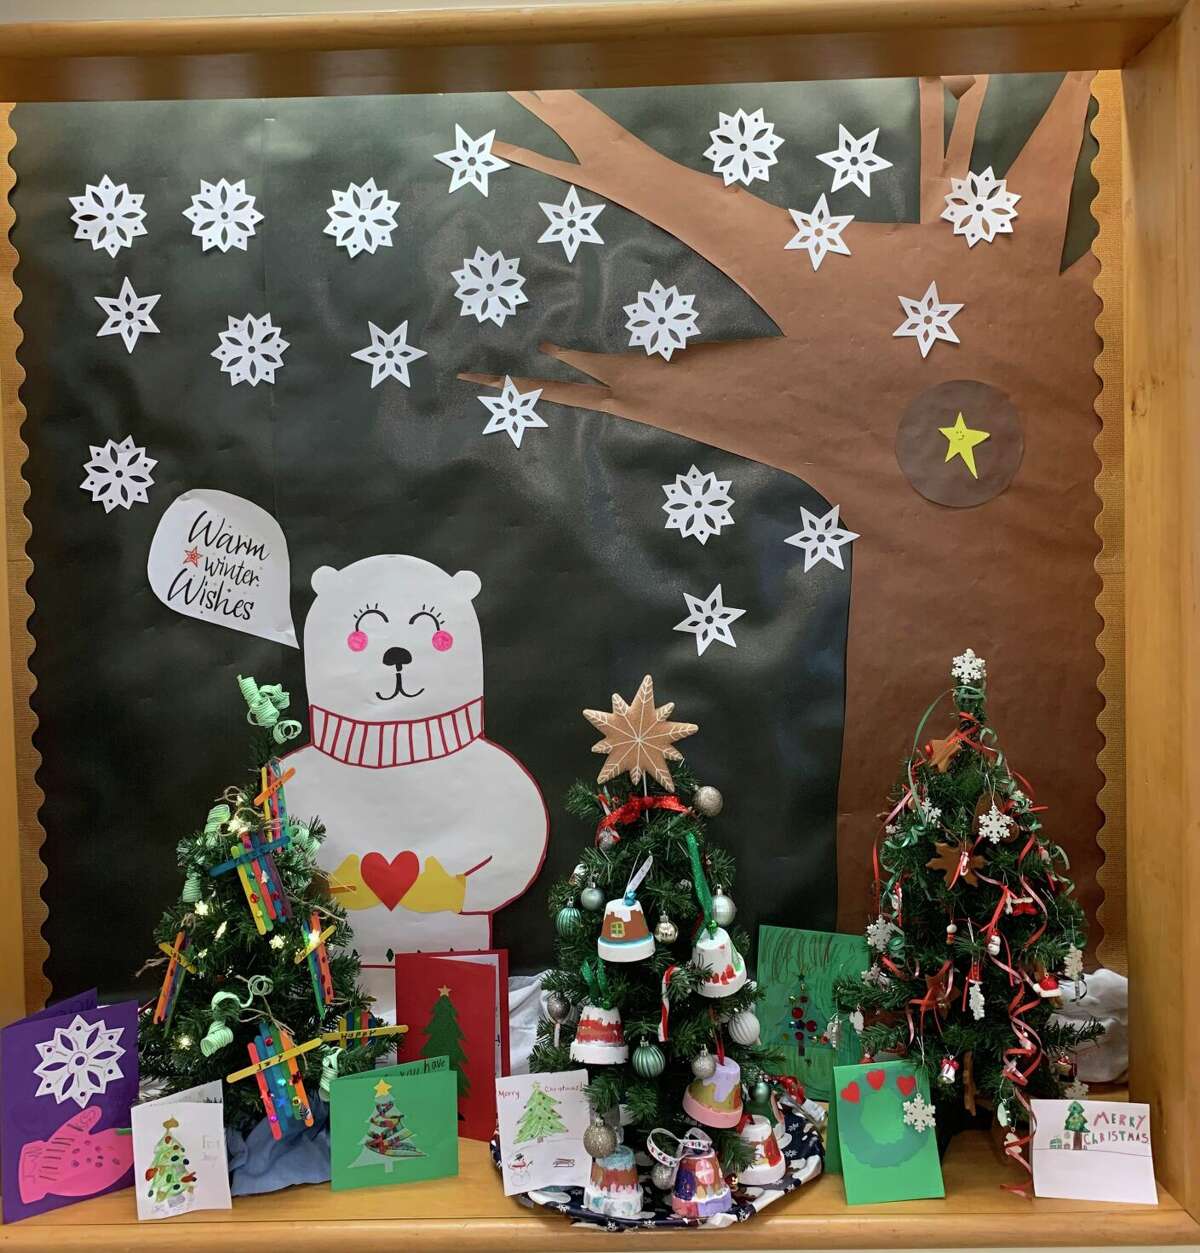 Christmas trees that were decorated by Litchfield County students to cheer up senior citizens over the holidays